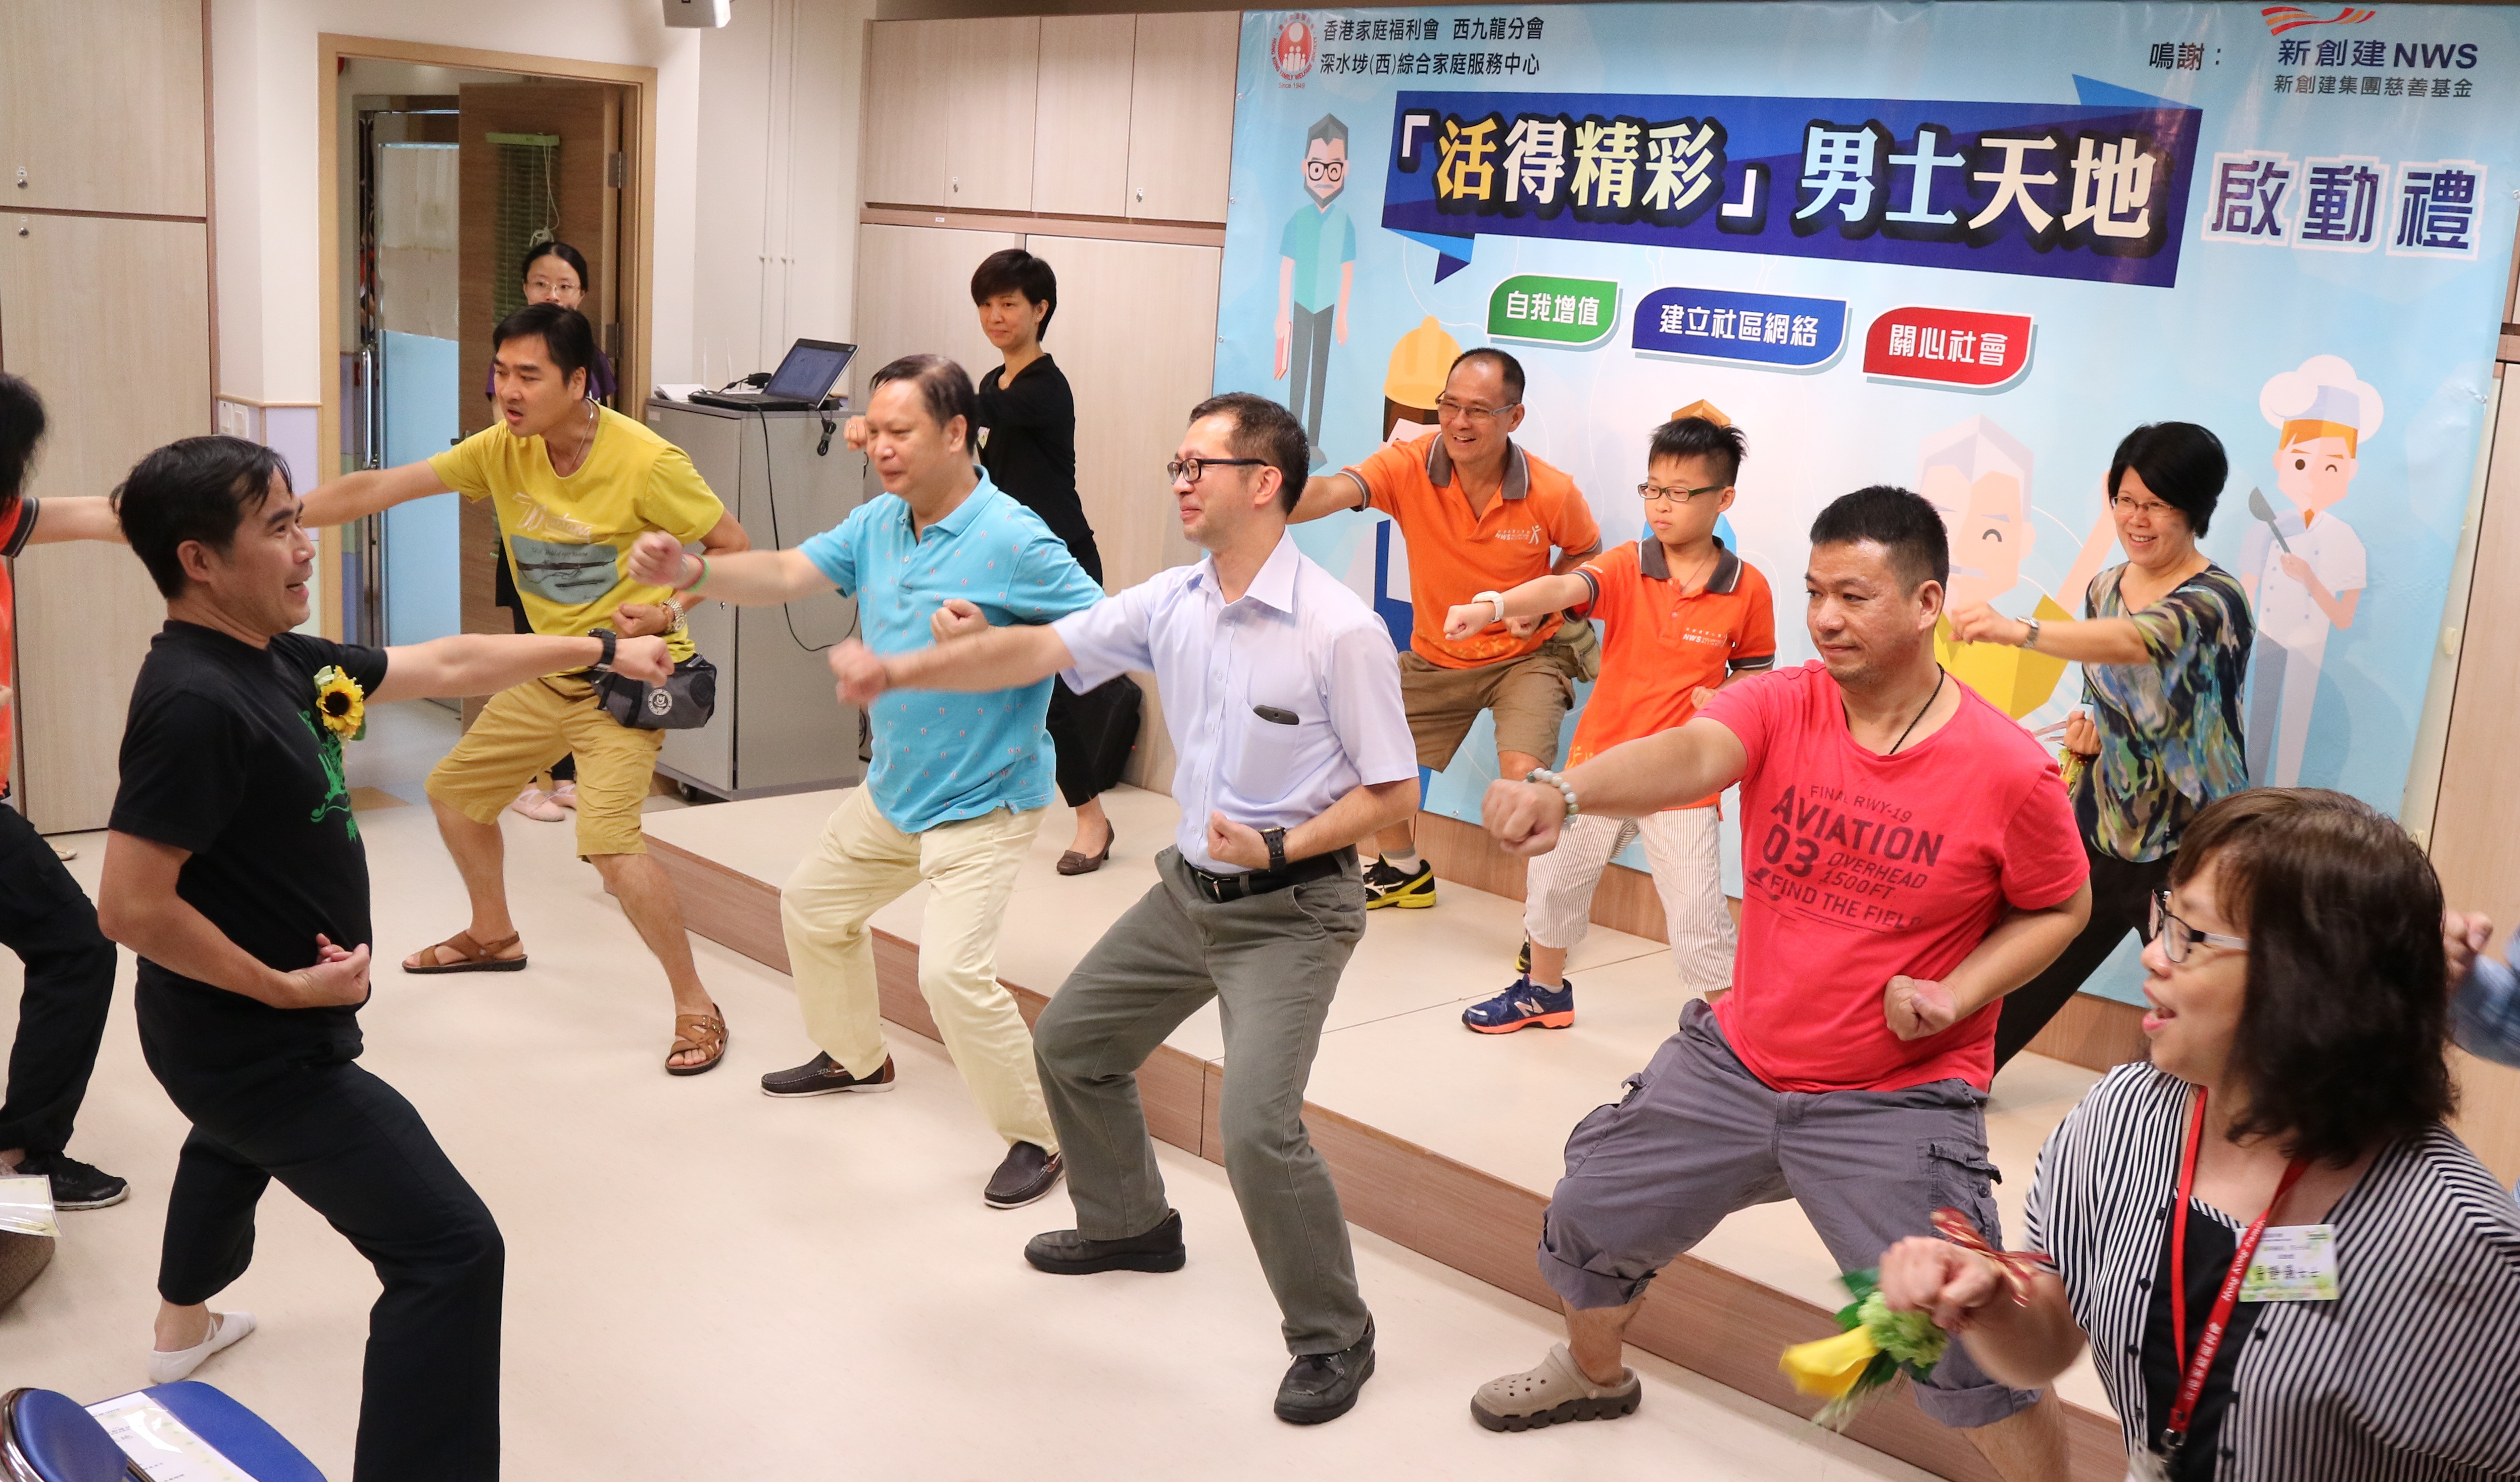 NWS Holdings’ new community programme helps Sham Shui Po men help themselves and others